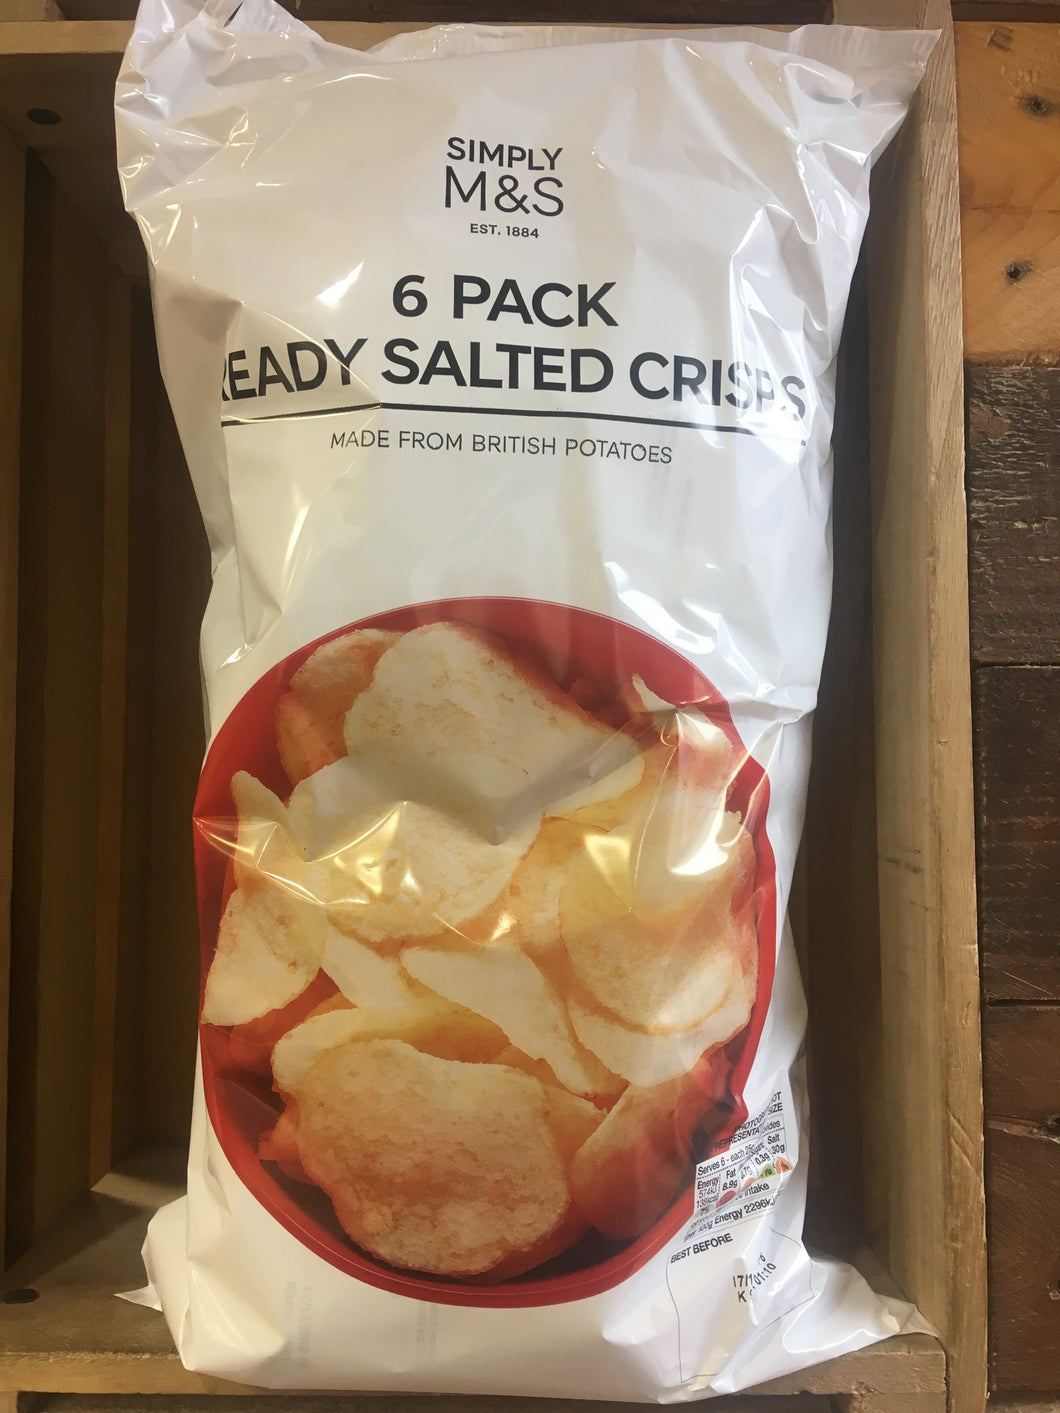 M&S Ready Salted Crisps 6 Pack (6x25g)